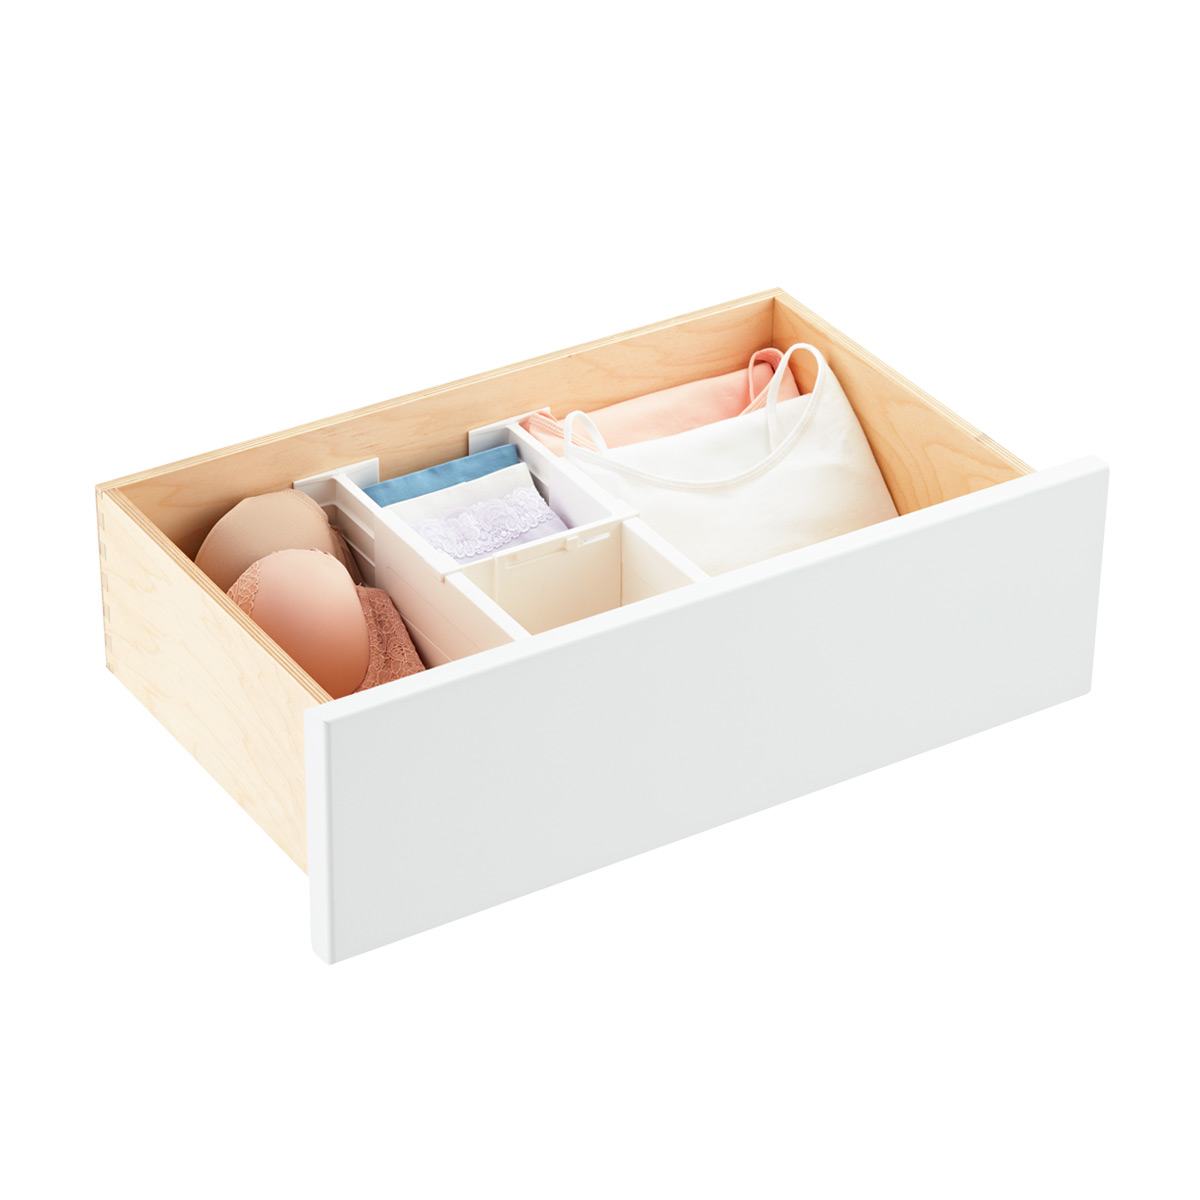 https://www.containerstore.com/catalogimages/517909/10023483-dream-drawer-organizer.jpg